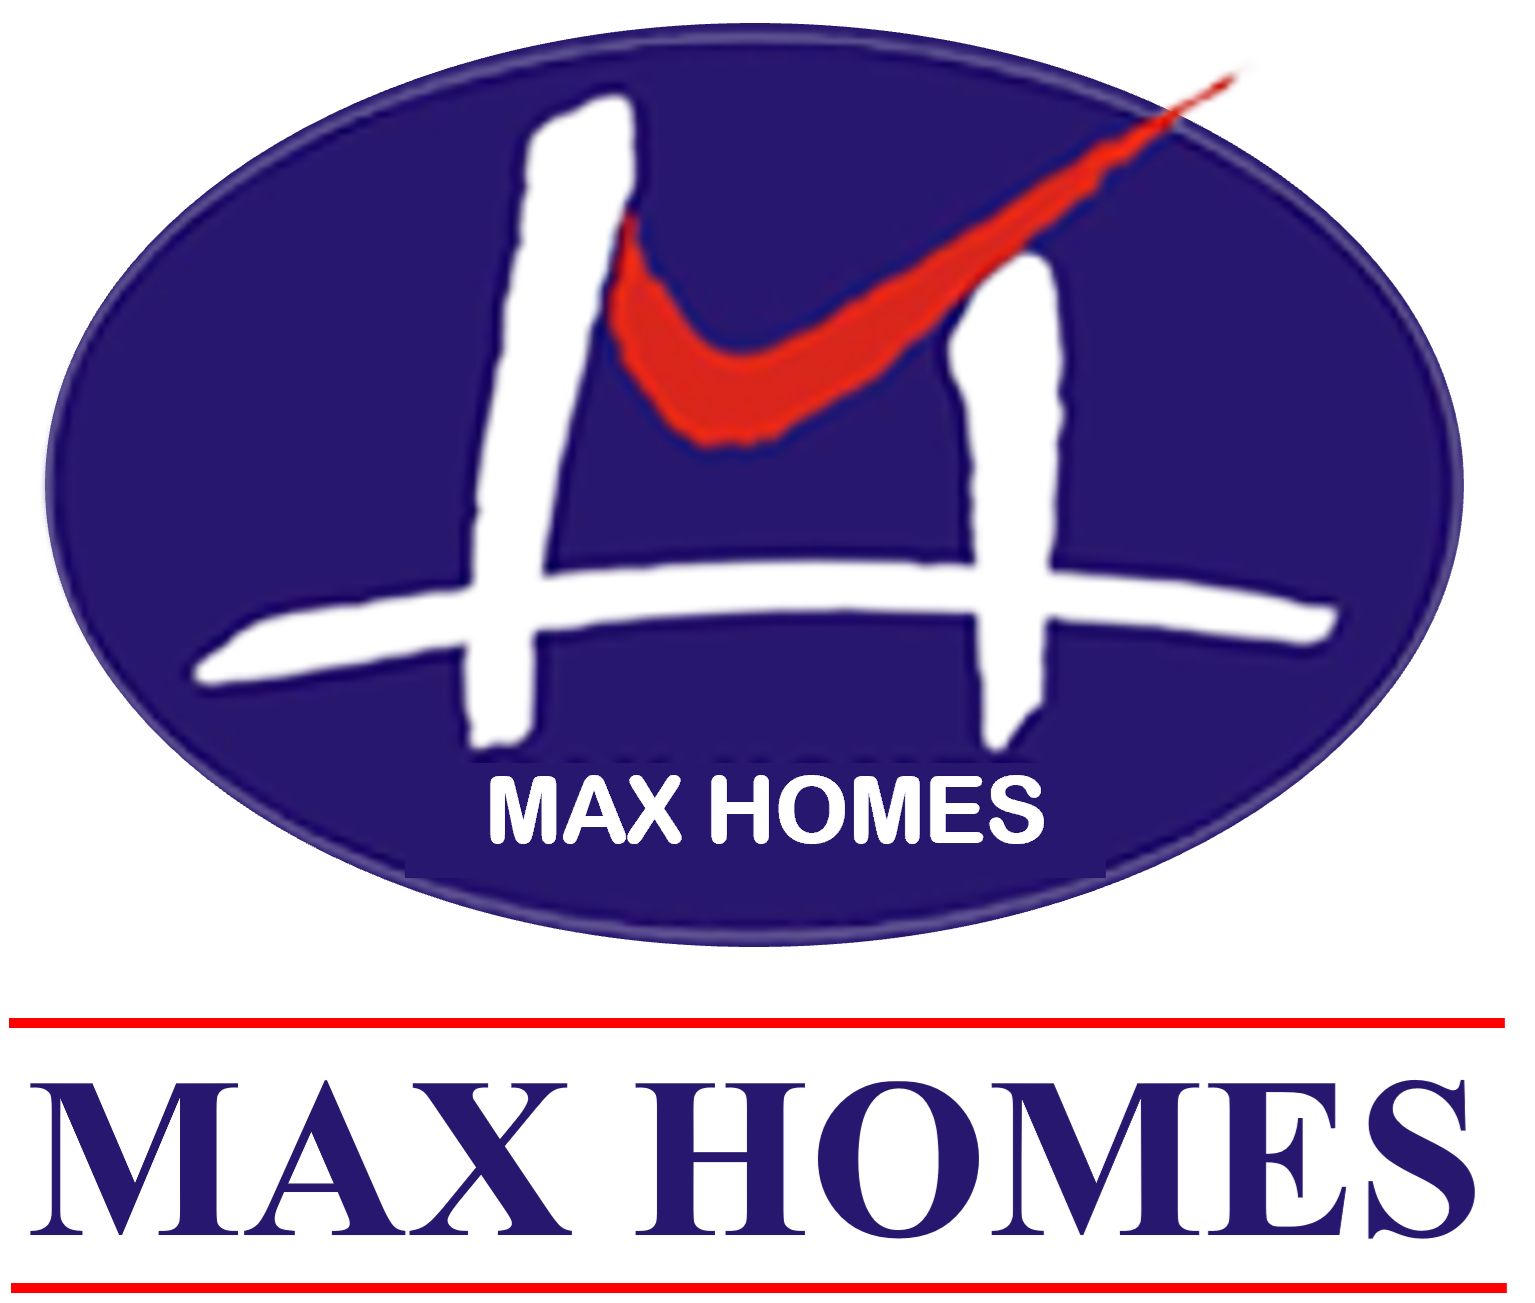 Max Homes, Auckland